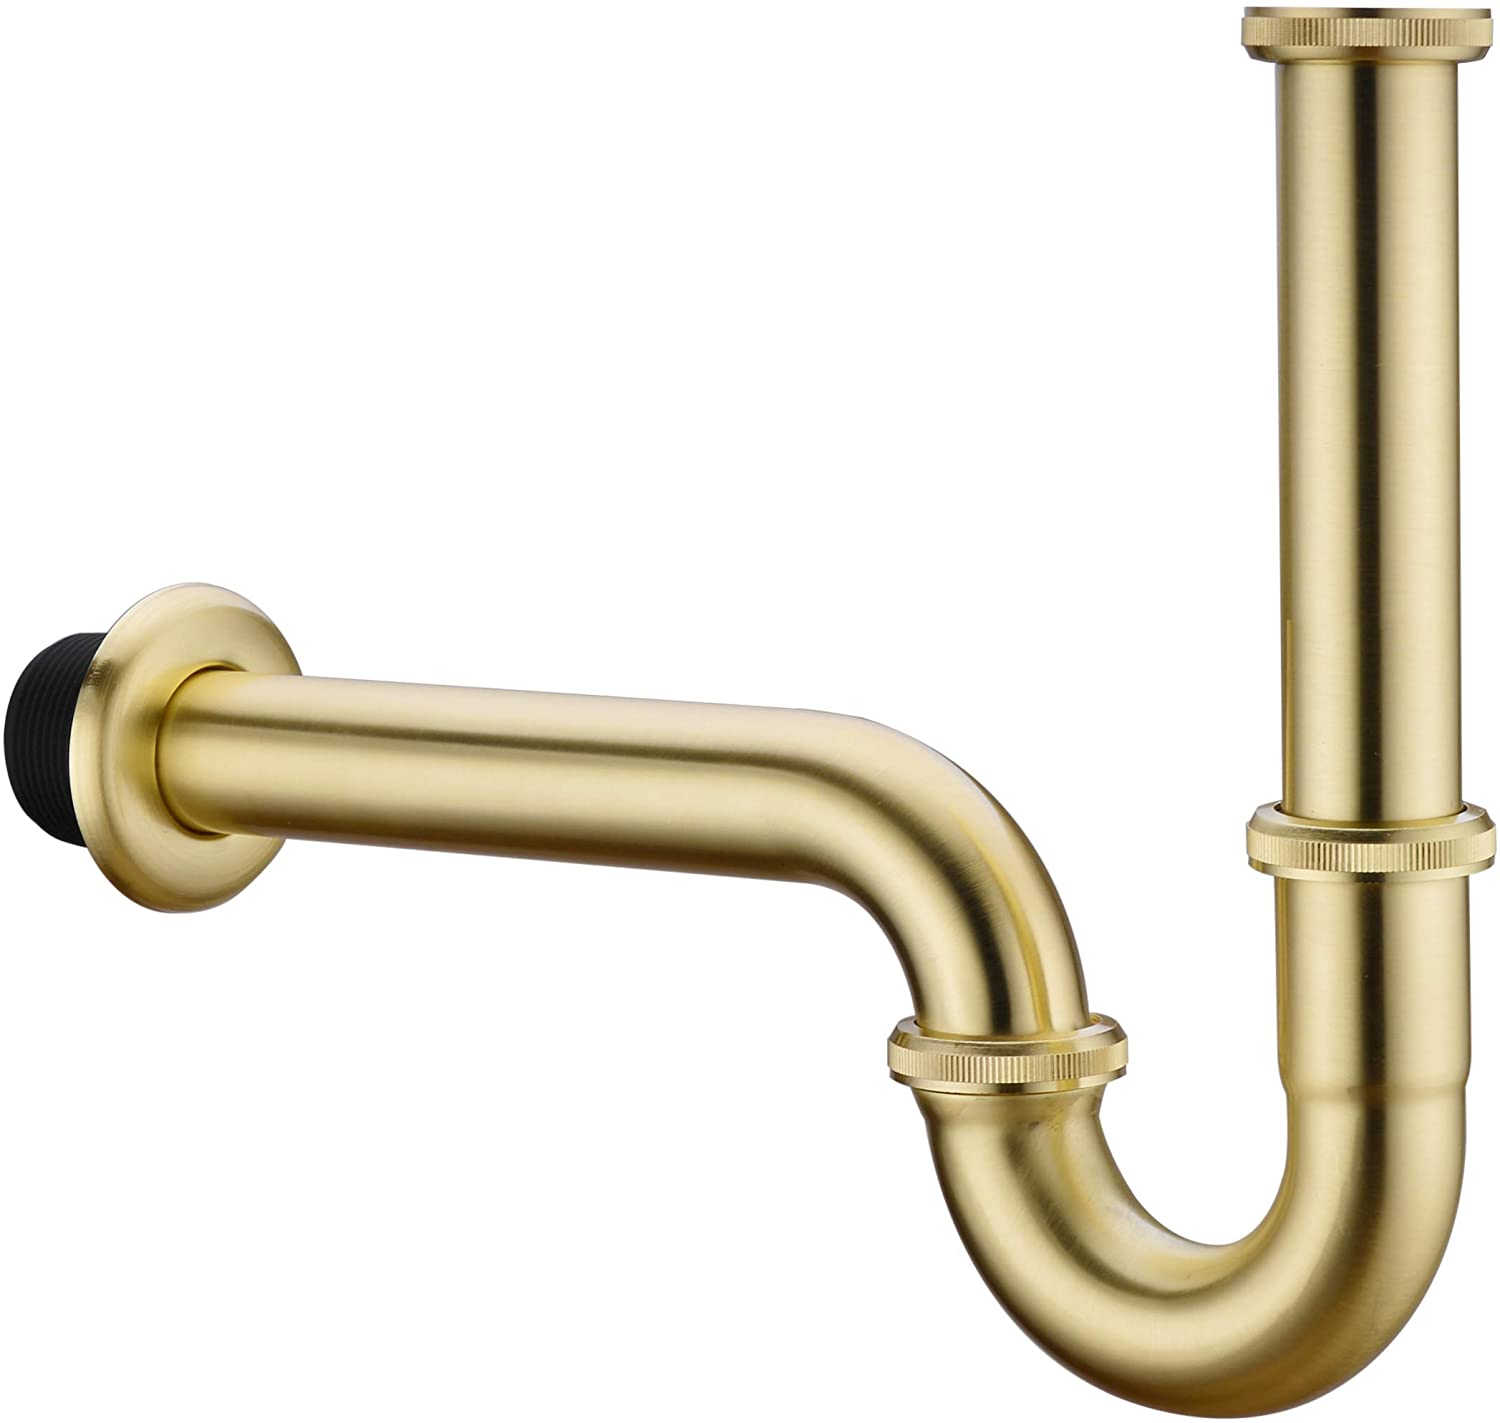 standard metal 1.25-inch p-trap in a brushed gold finish